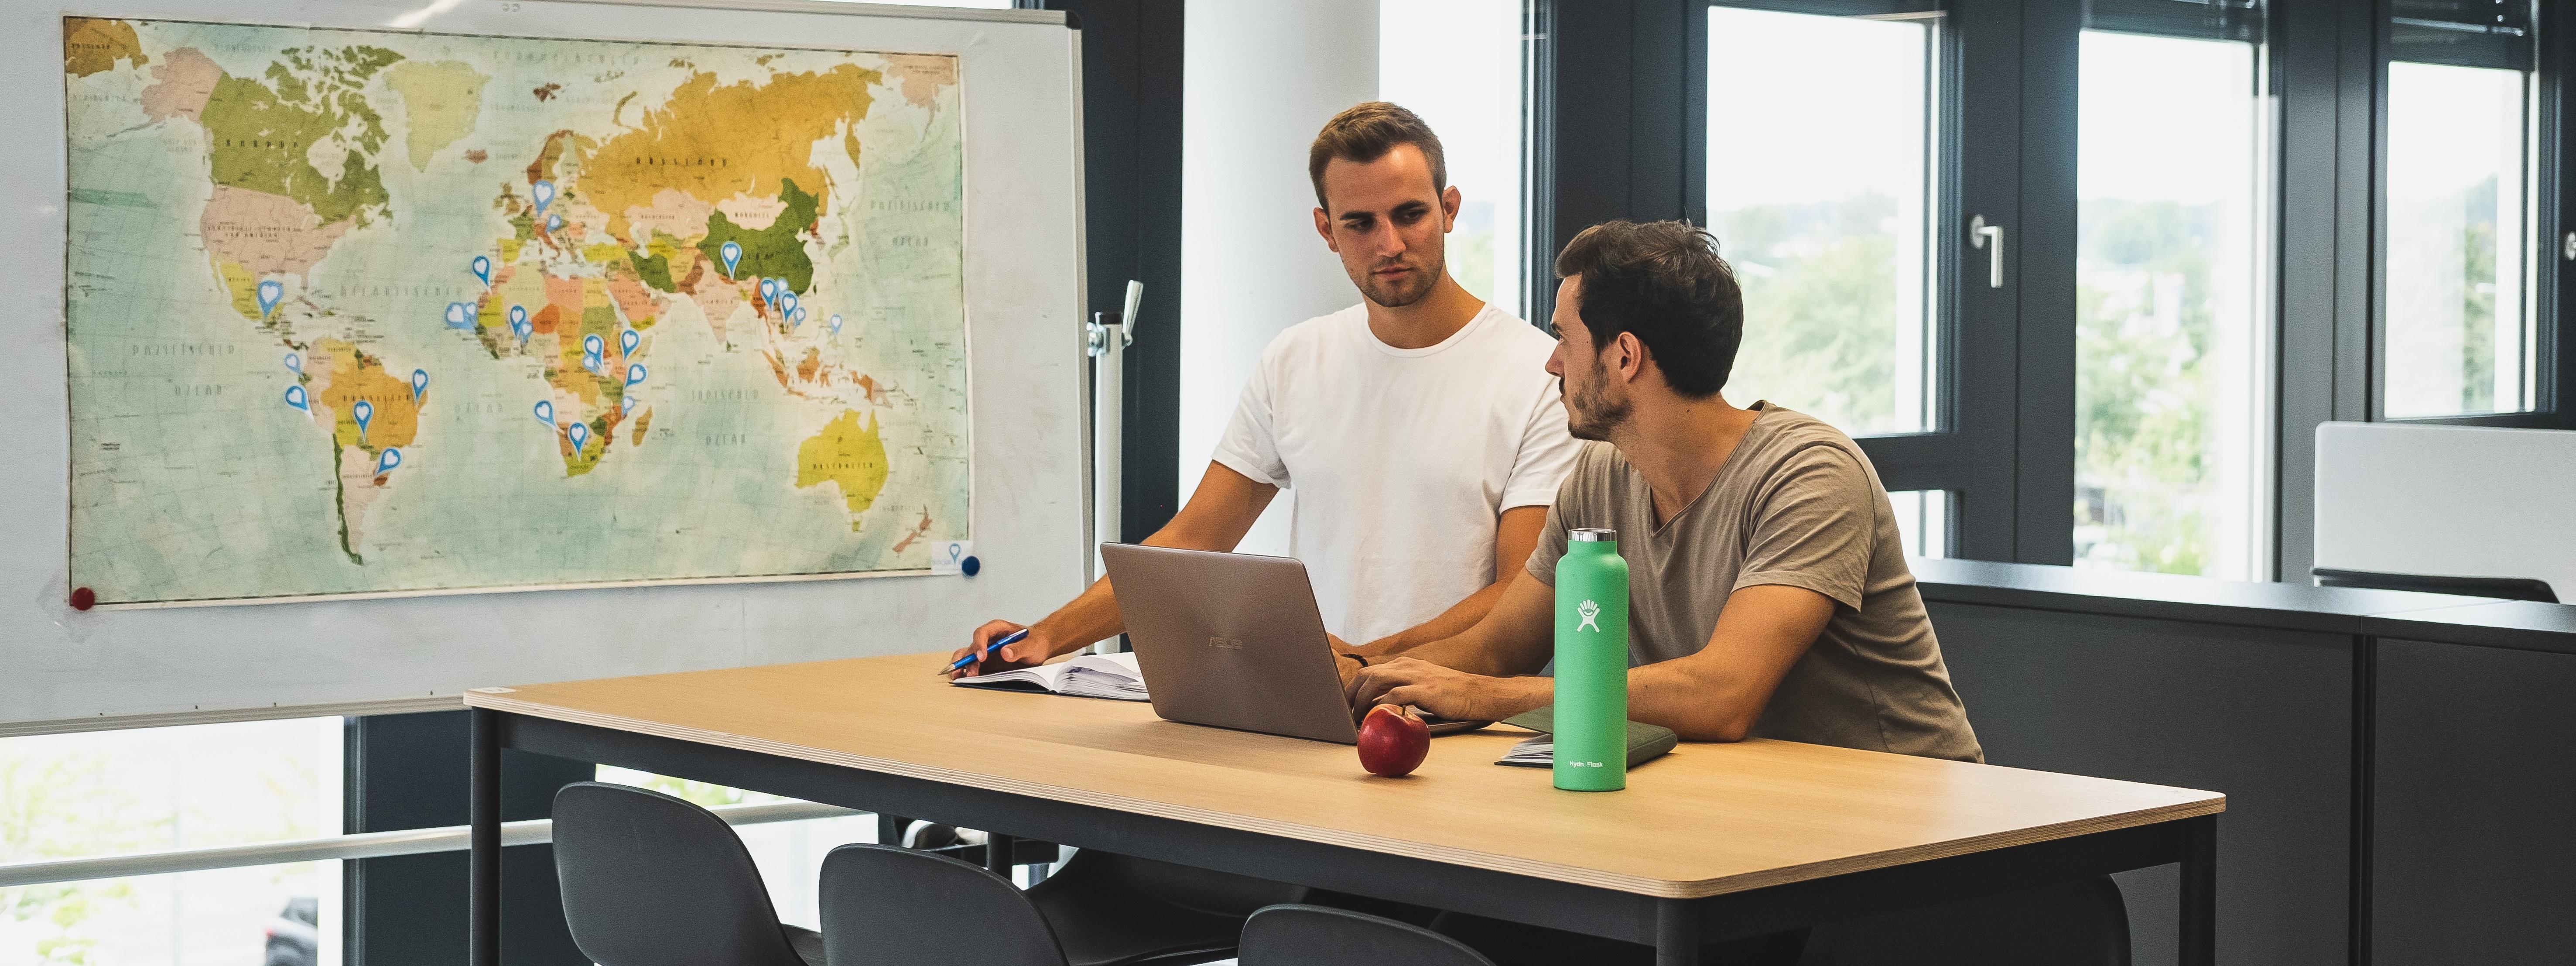 The founders of Socialbnb standing at a desk, next to them a world map